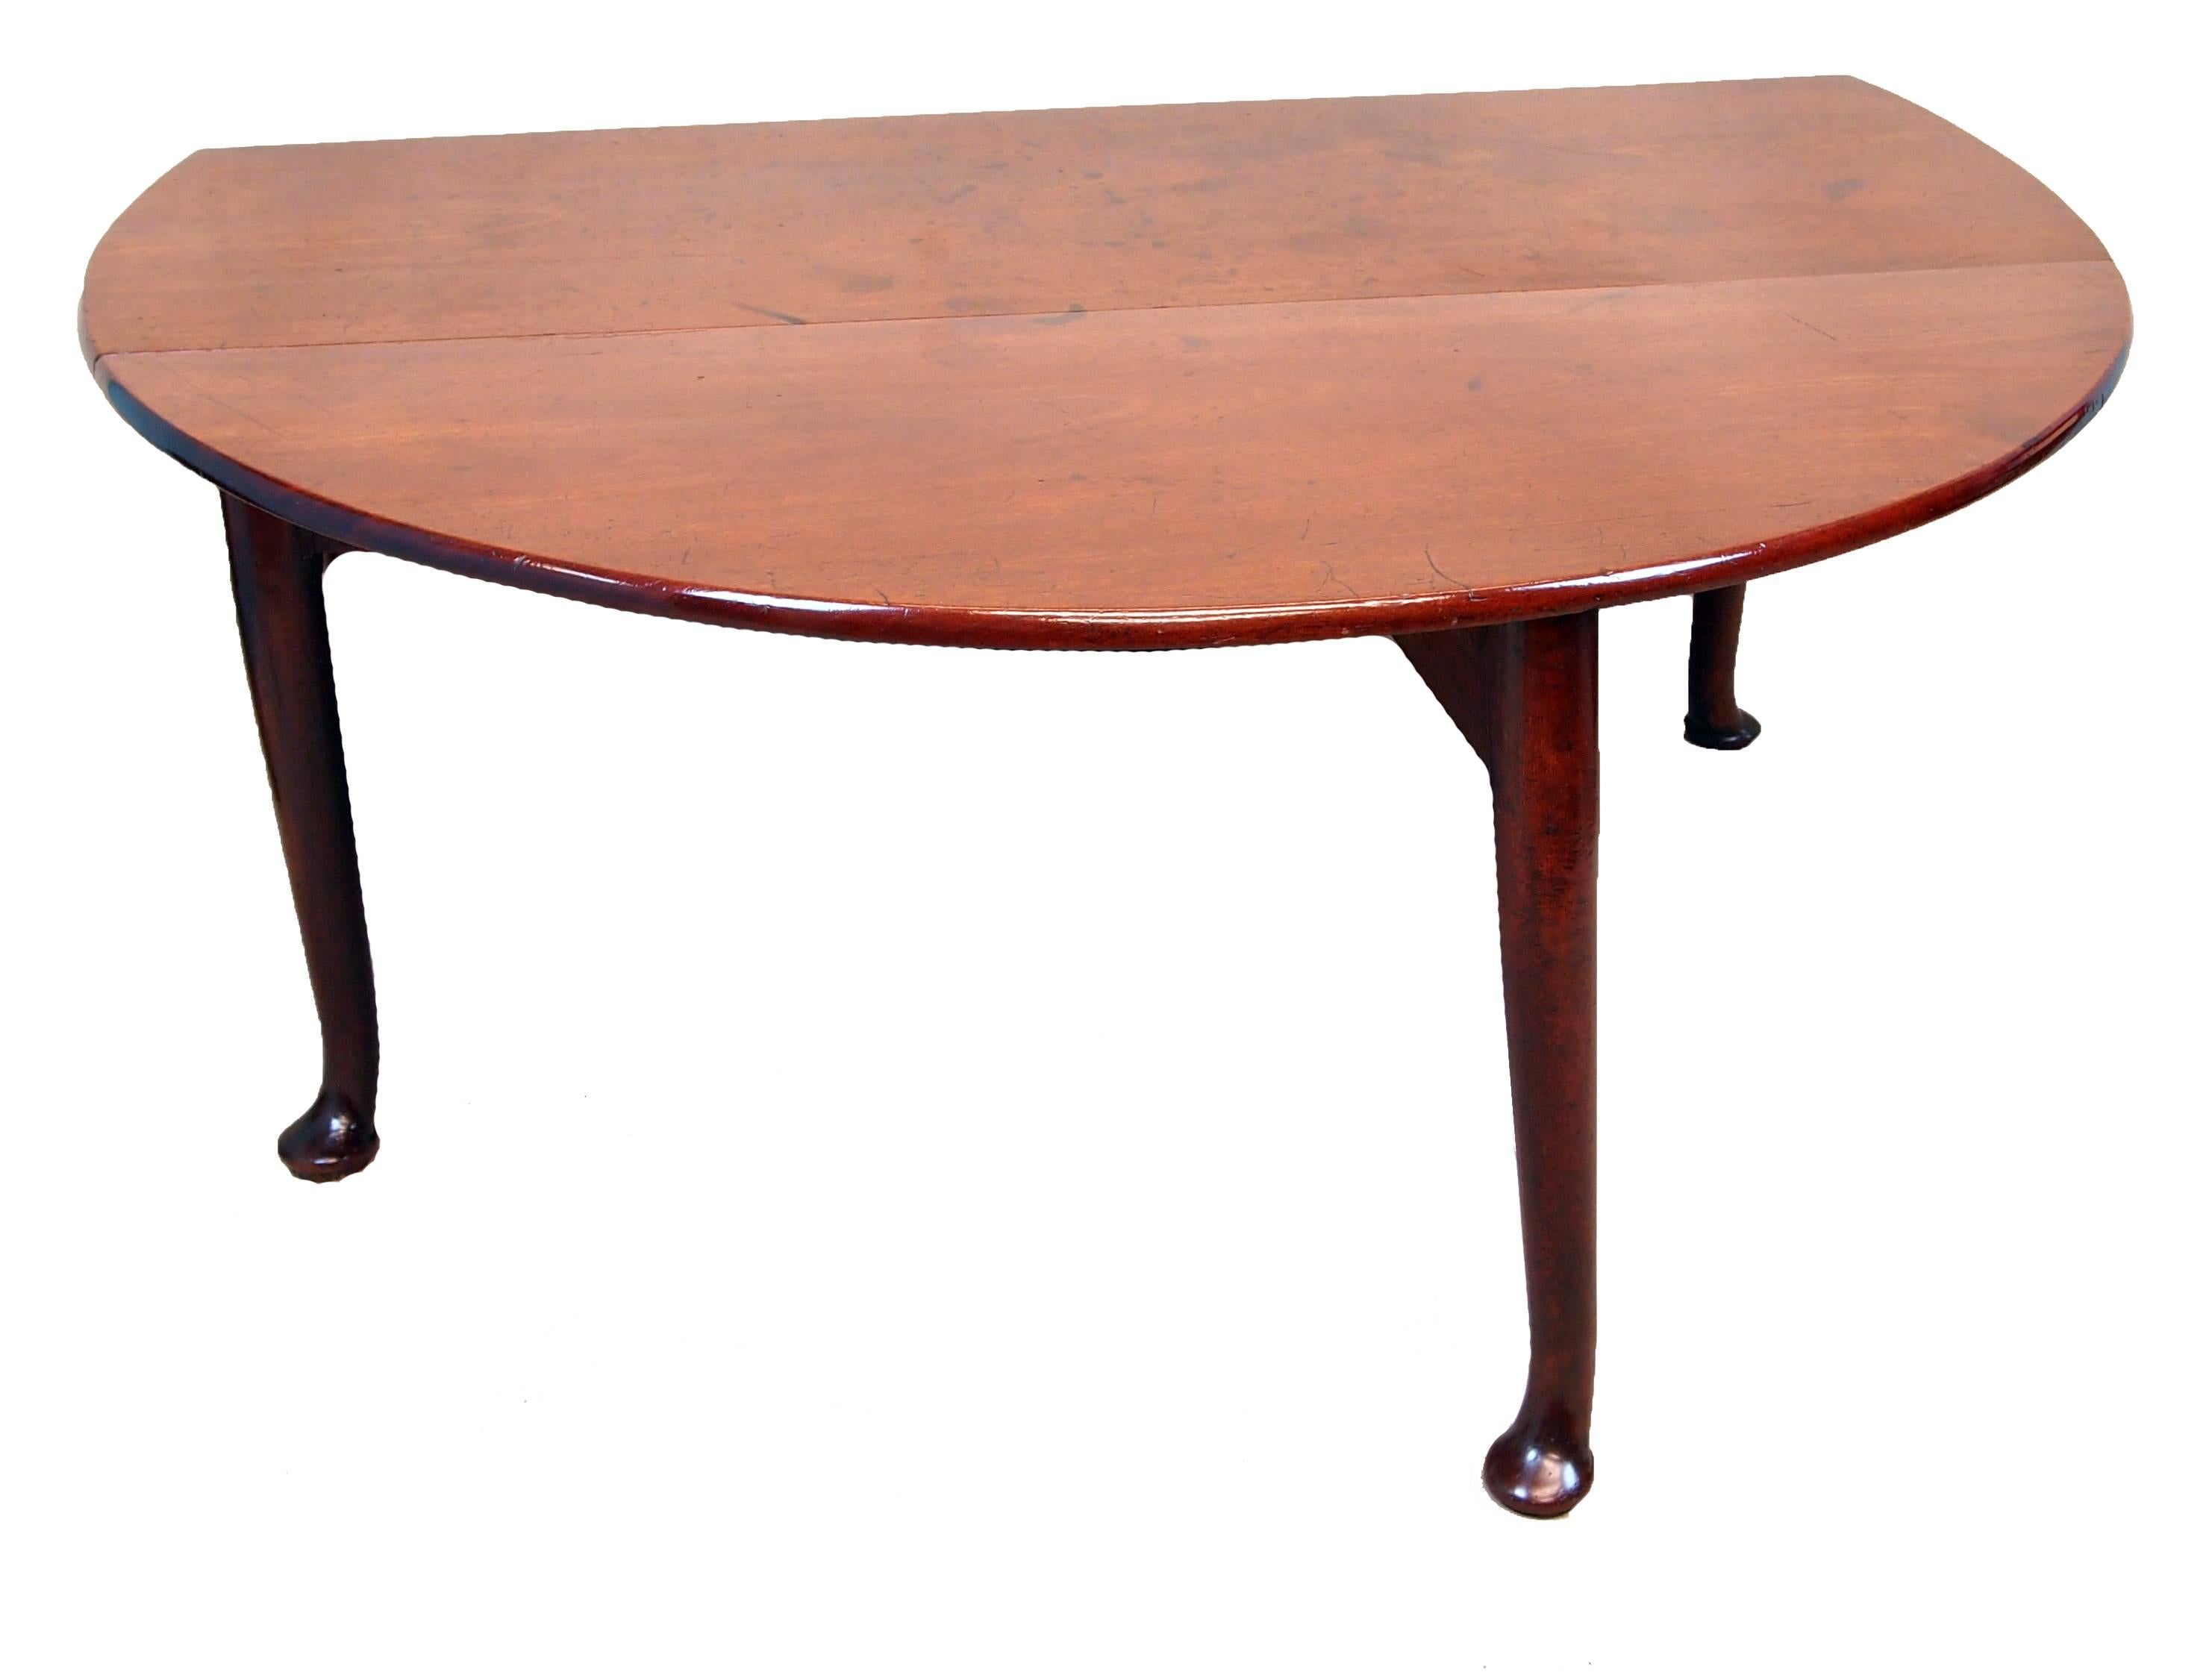 A stunning 18th century solid mahogany drop leaf dining table having well figured
top of exceptional color and patina raised on elegant turned legs and original
pad feet,


circa 1760.


Measure: H 28 inches
W 24 inches (flaps down)
W 68